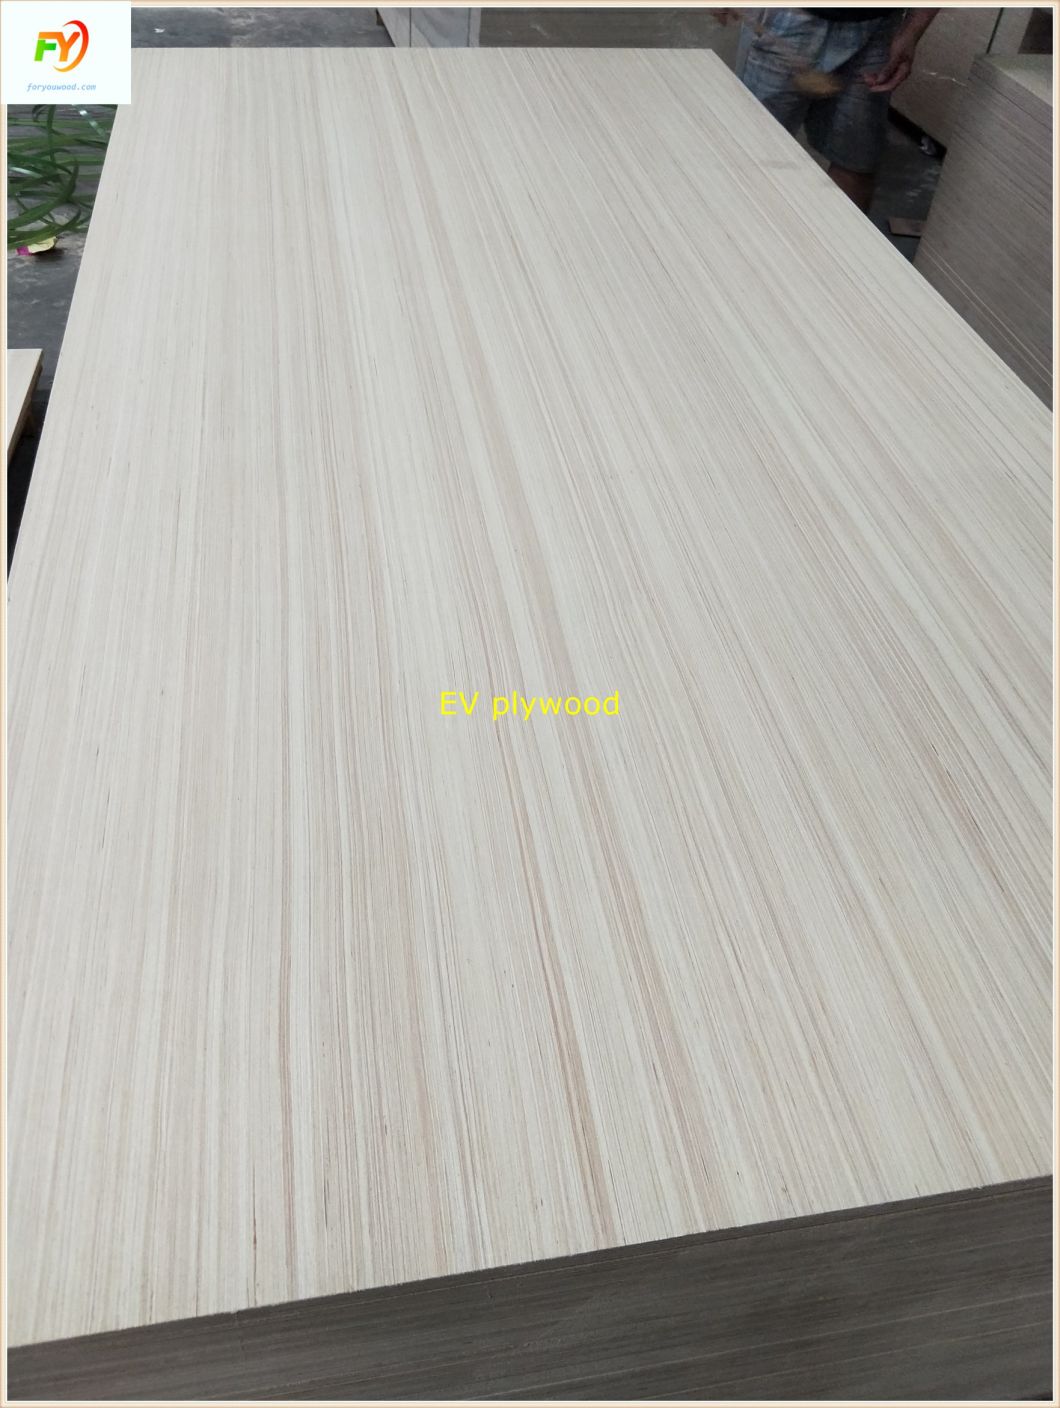 Plywood Sheet/Commercial Plywood/Furniture Plywood/Okoume Plywood/Bintangor Plywood/Pine Plywood/Birch Plywood/Pencil Cedar Plywood/Poplar Plywood/EV Plywood